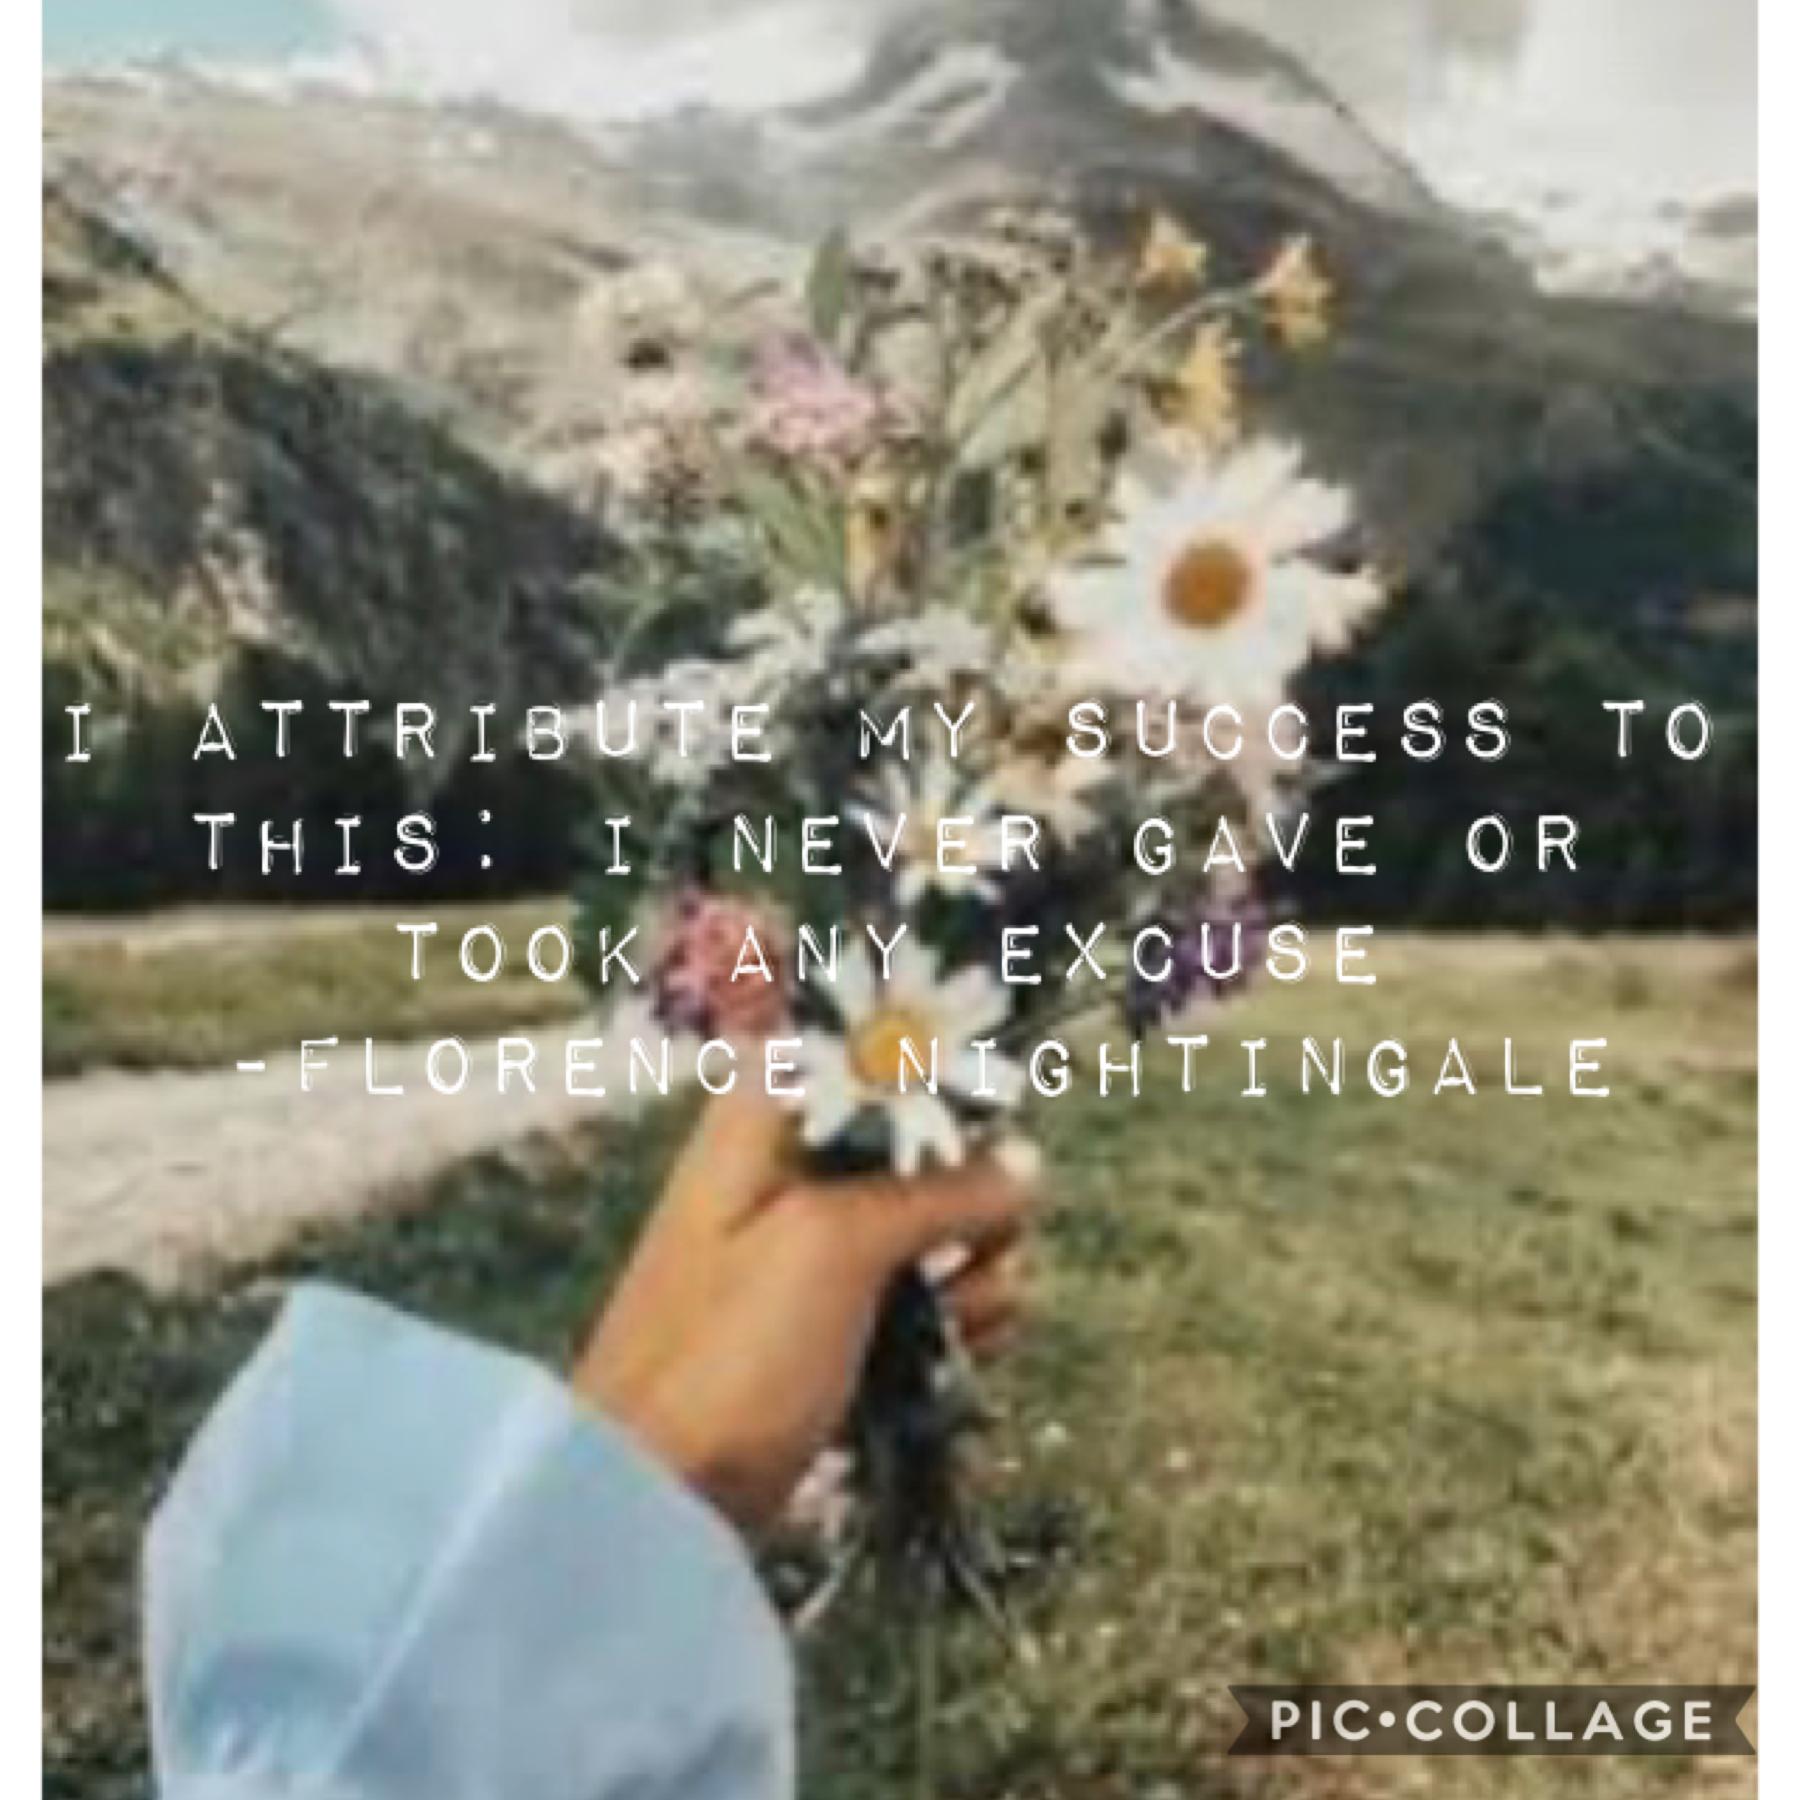 🌸tap🌸
Hey y’all! Sorry for the bad quality pic. This is one of my fav quotes so I hope you like it!